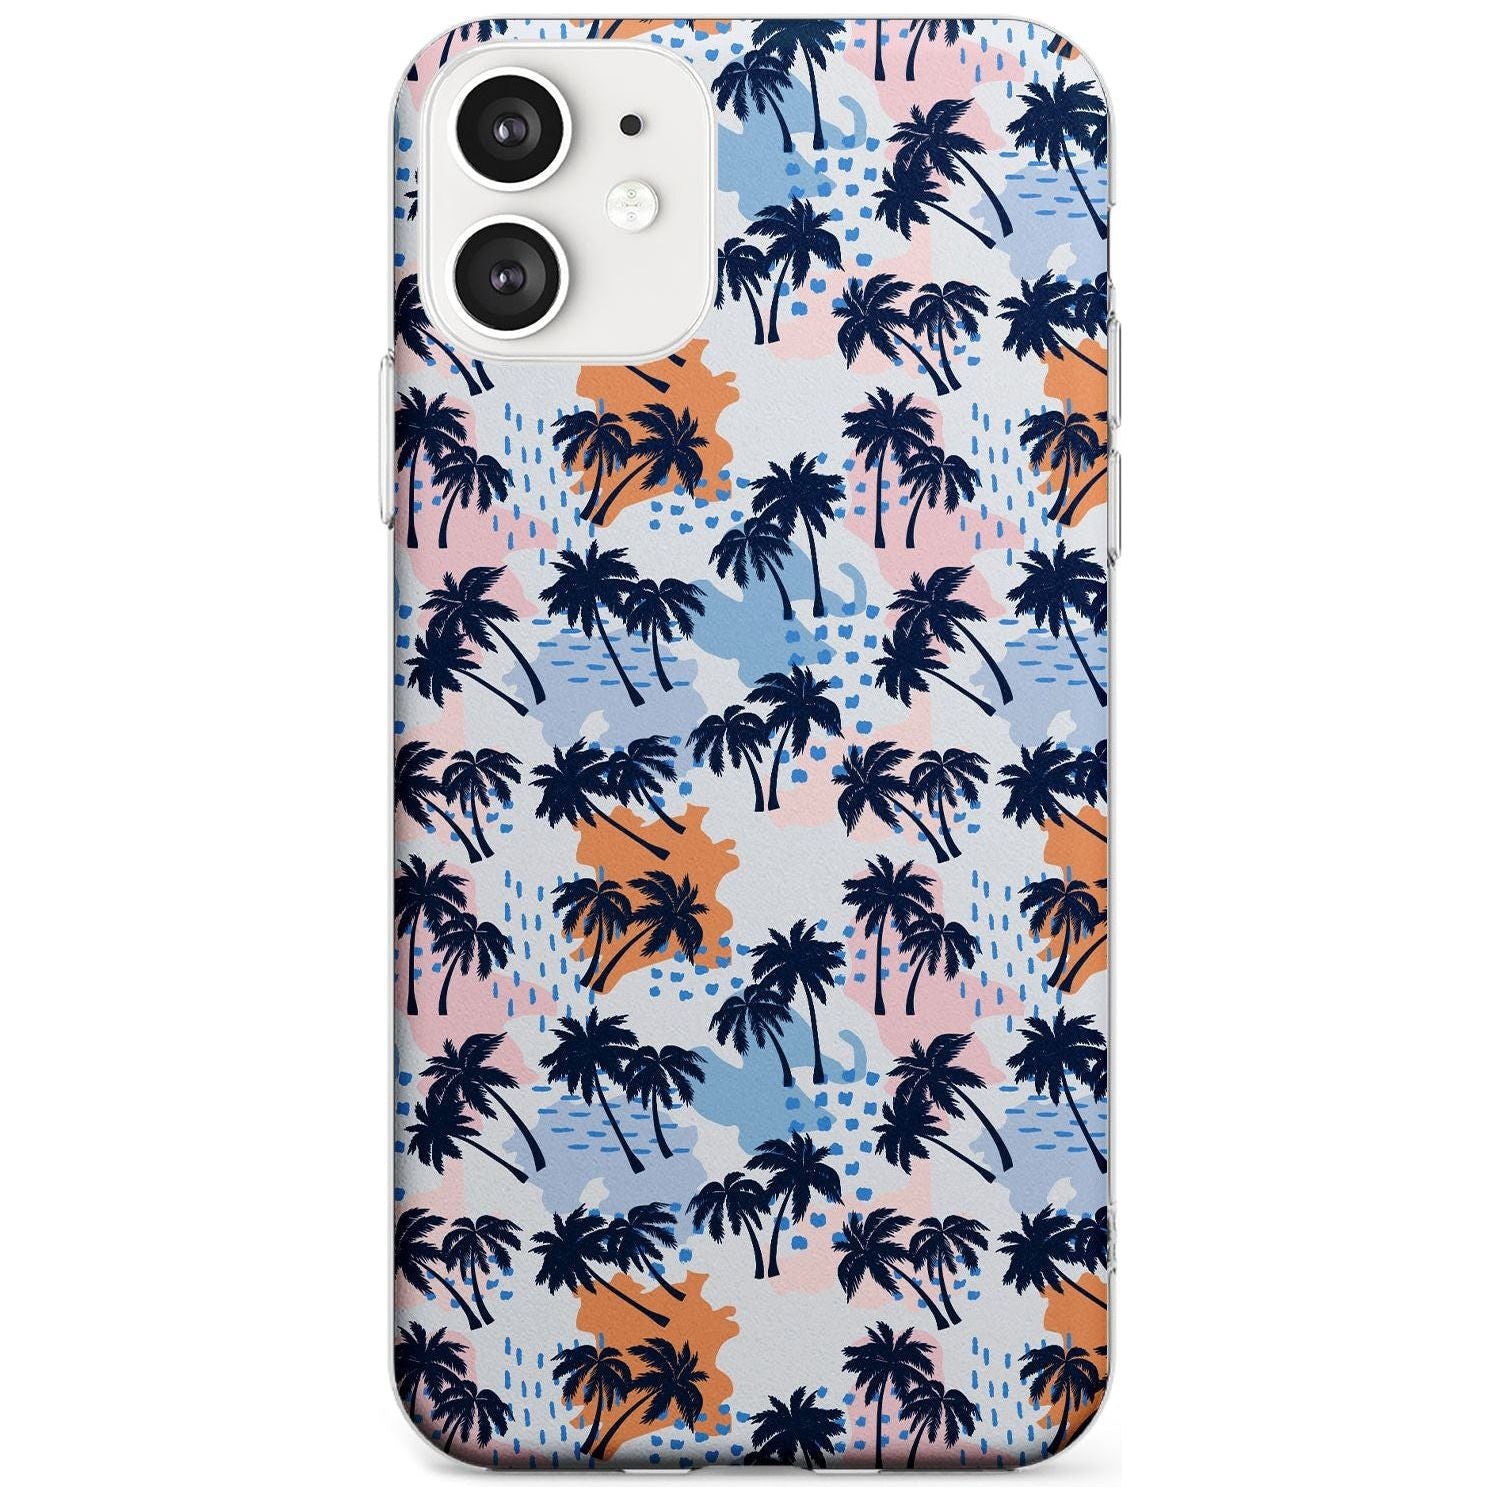 Summer Palm Trees Black Impact Phone Case for iPhone 11